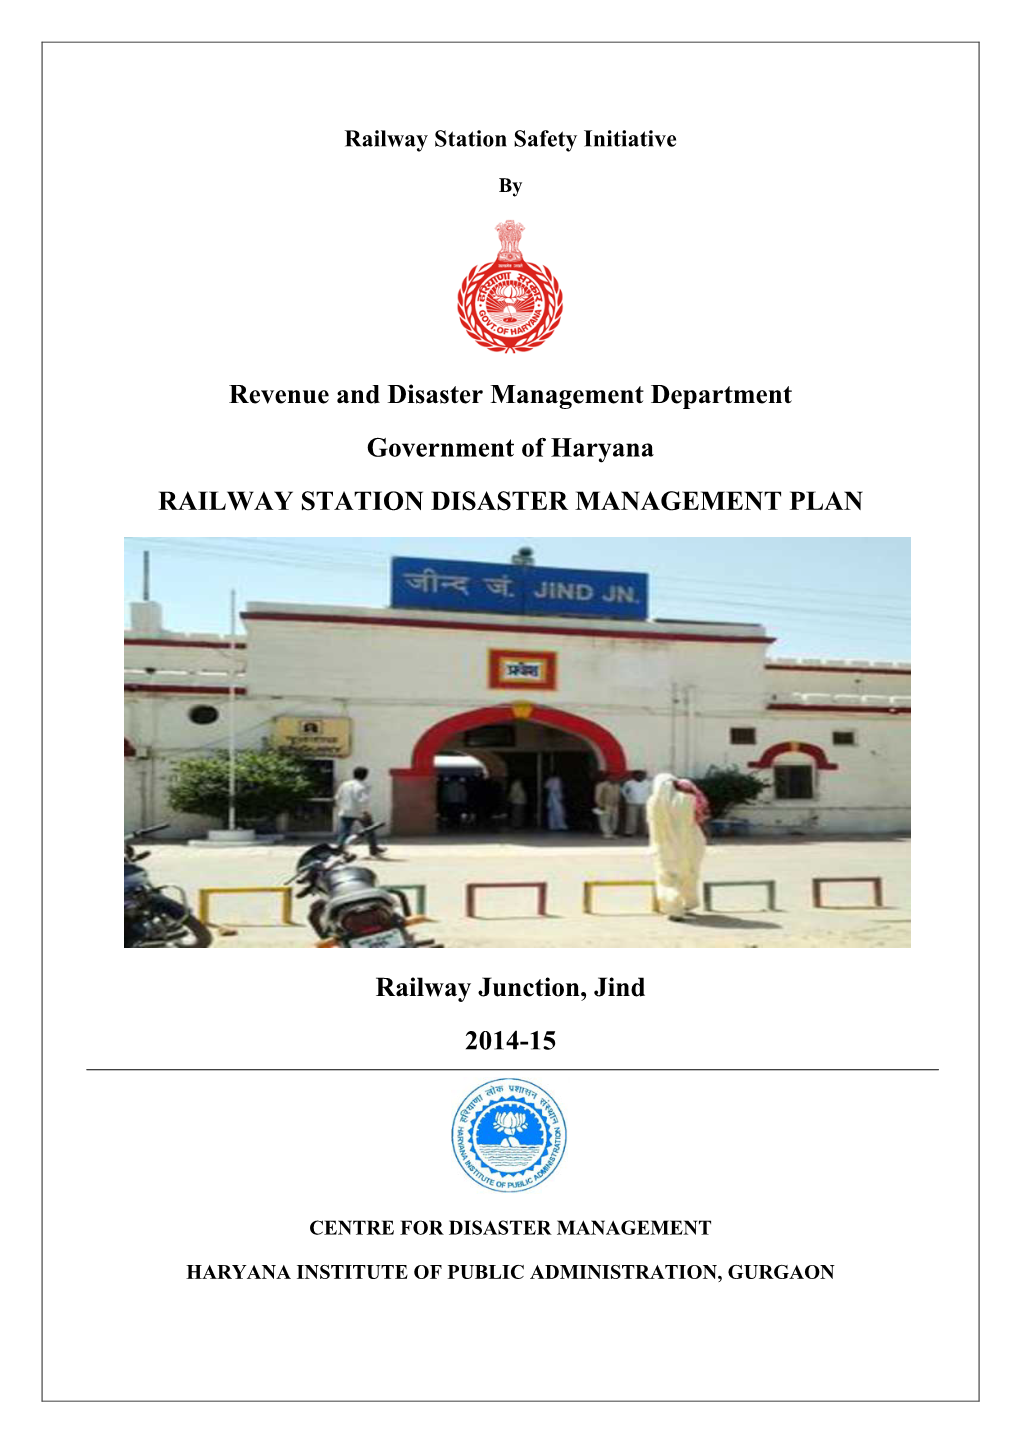 Revenue and Disaster Management Department Government Of